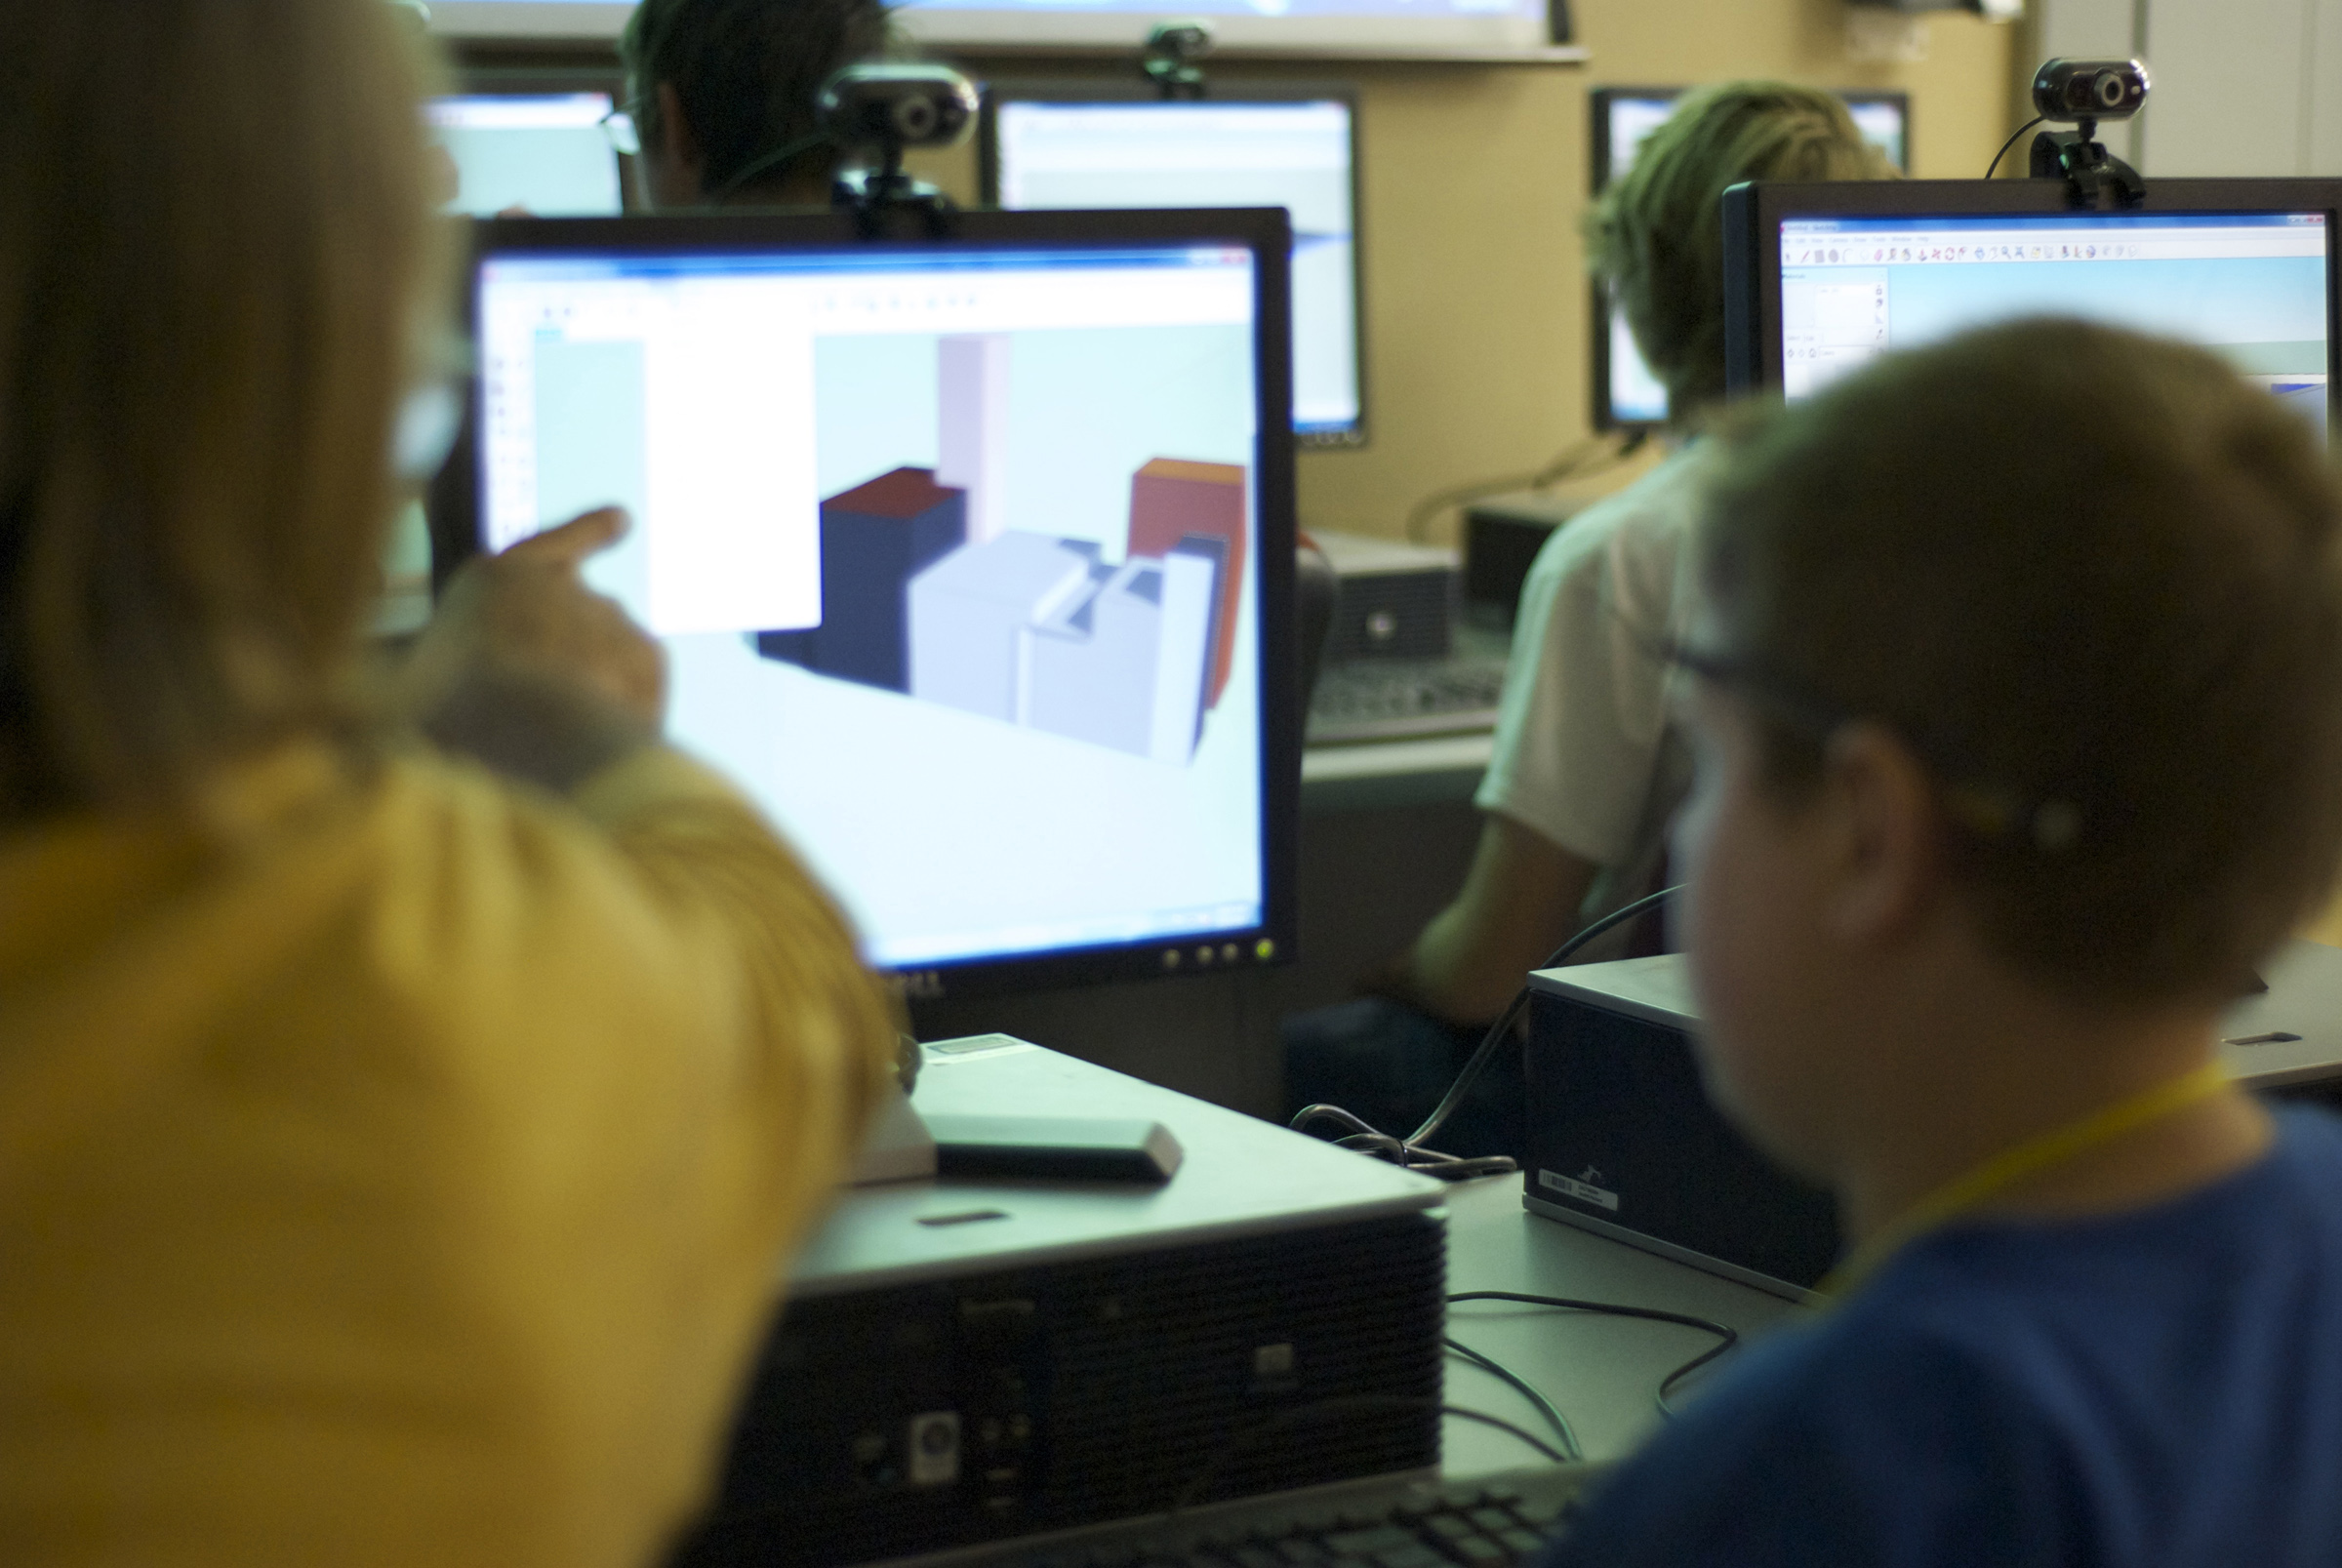 NeuroVersity teaches students with autism spectrum disorder how to use the 3-D modeling software.